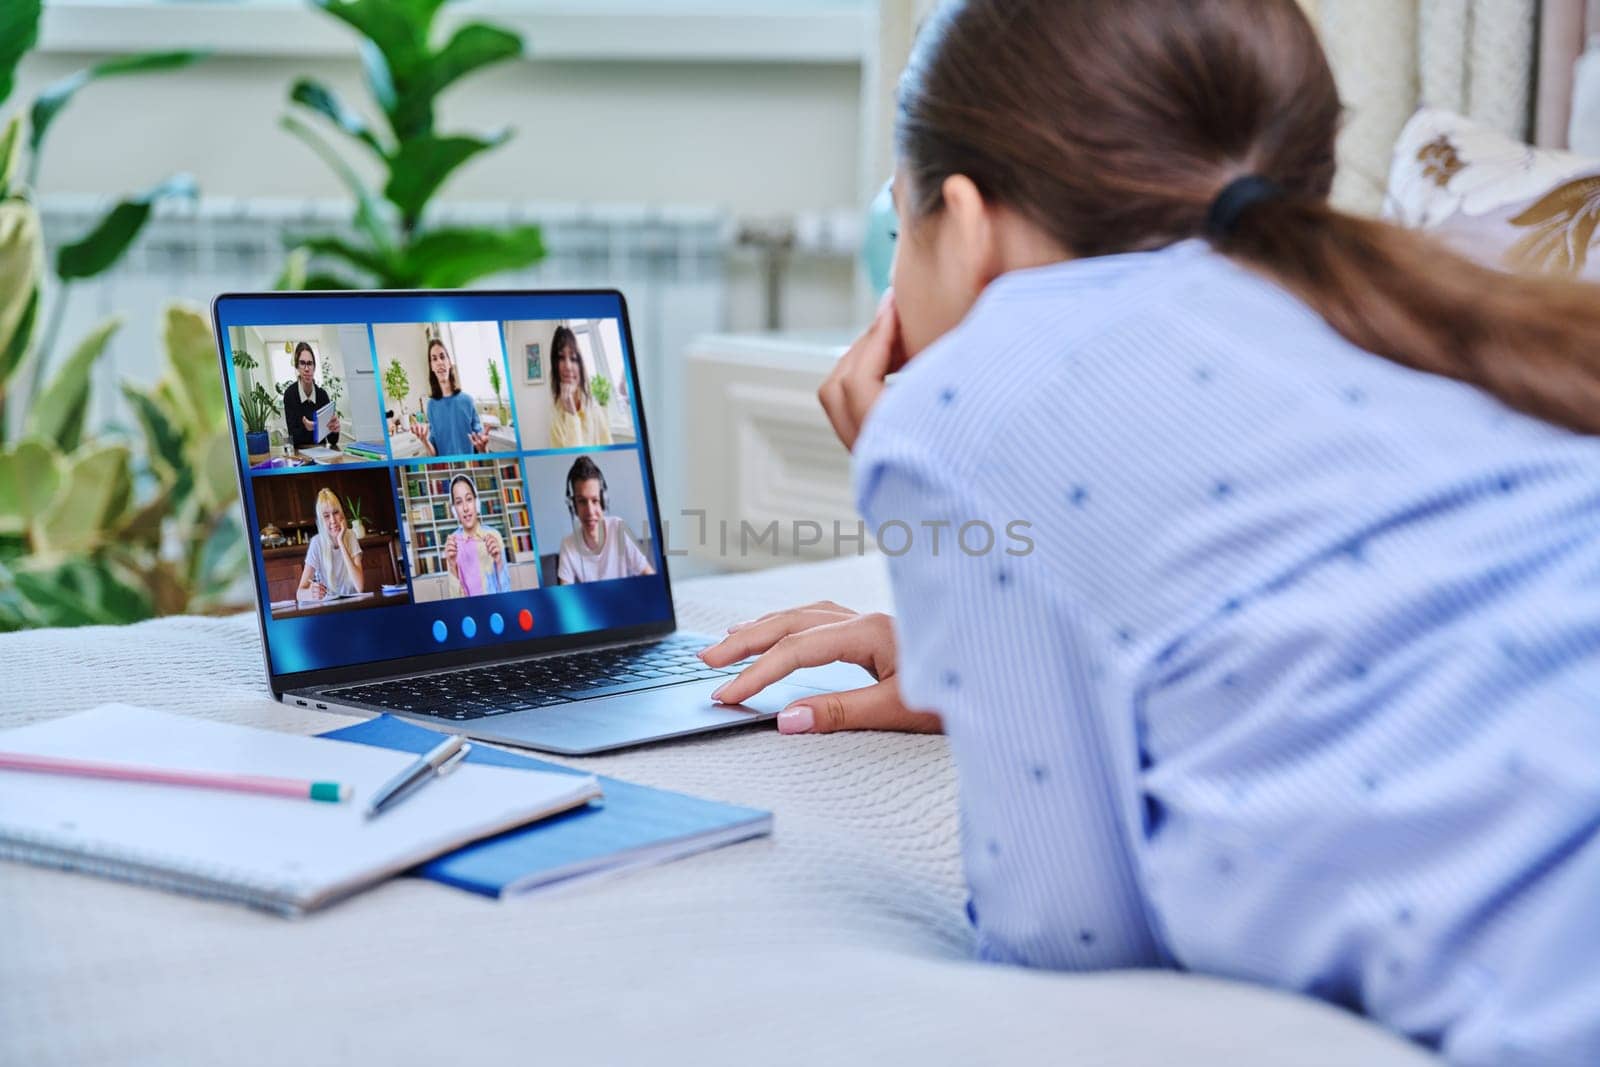 Video conference, teen girl student looking at laptop screen with group of teenagers studying remotely at home. Online lesson distance learning course. E-learning e-education technology high school